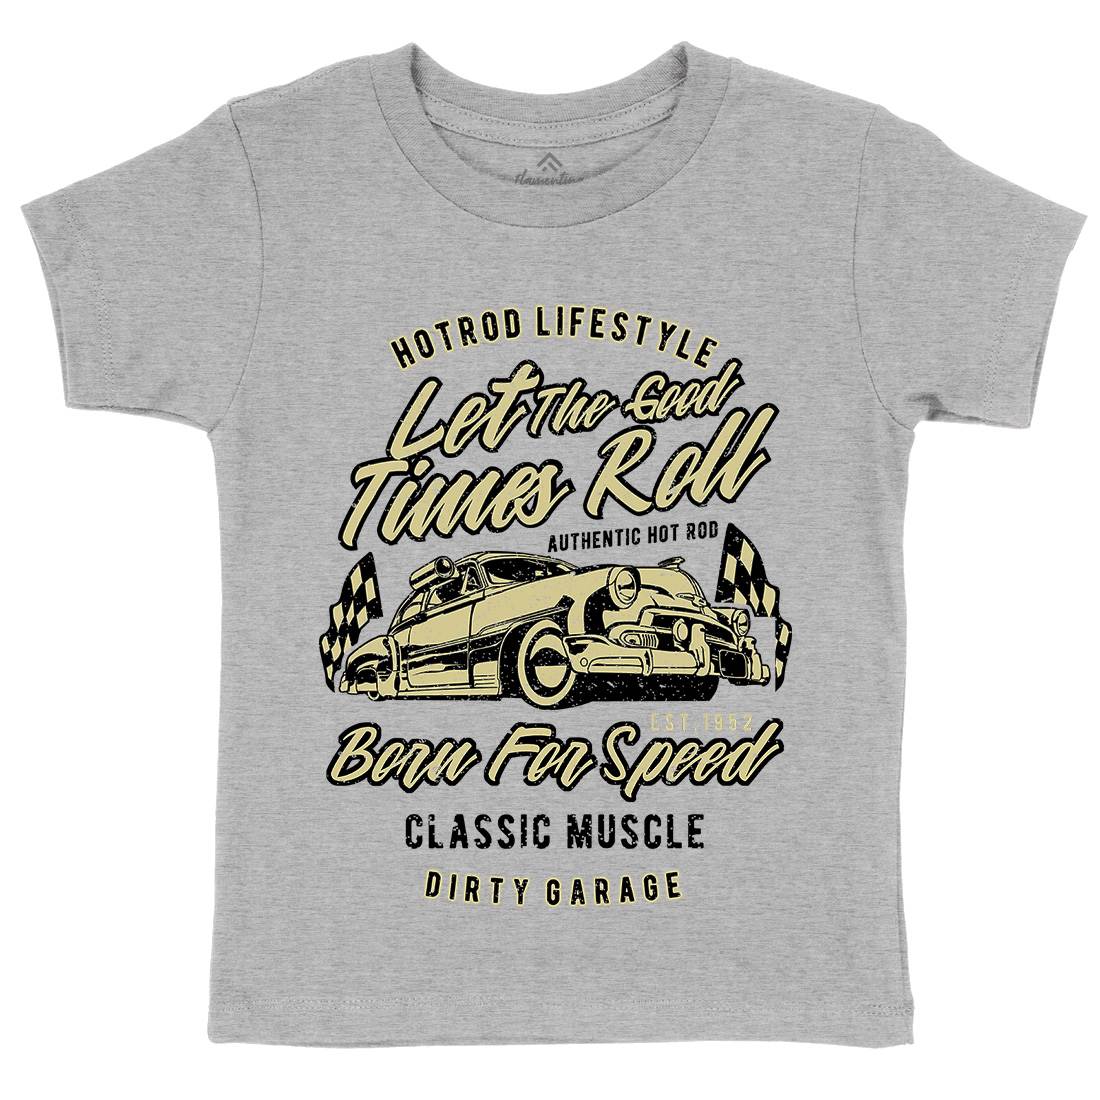 Let The Good Times Roll Kids Crew Neck T-Shirt Cars A705